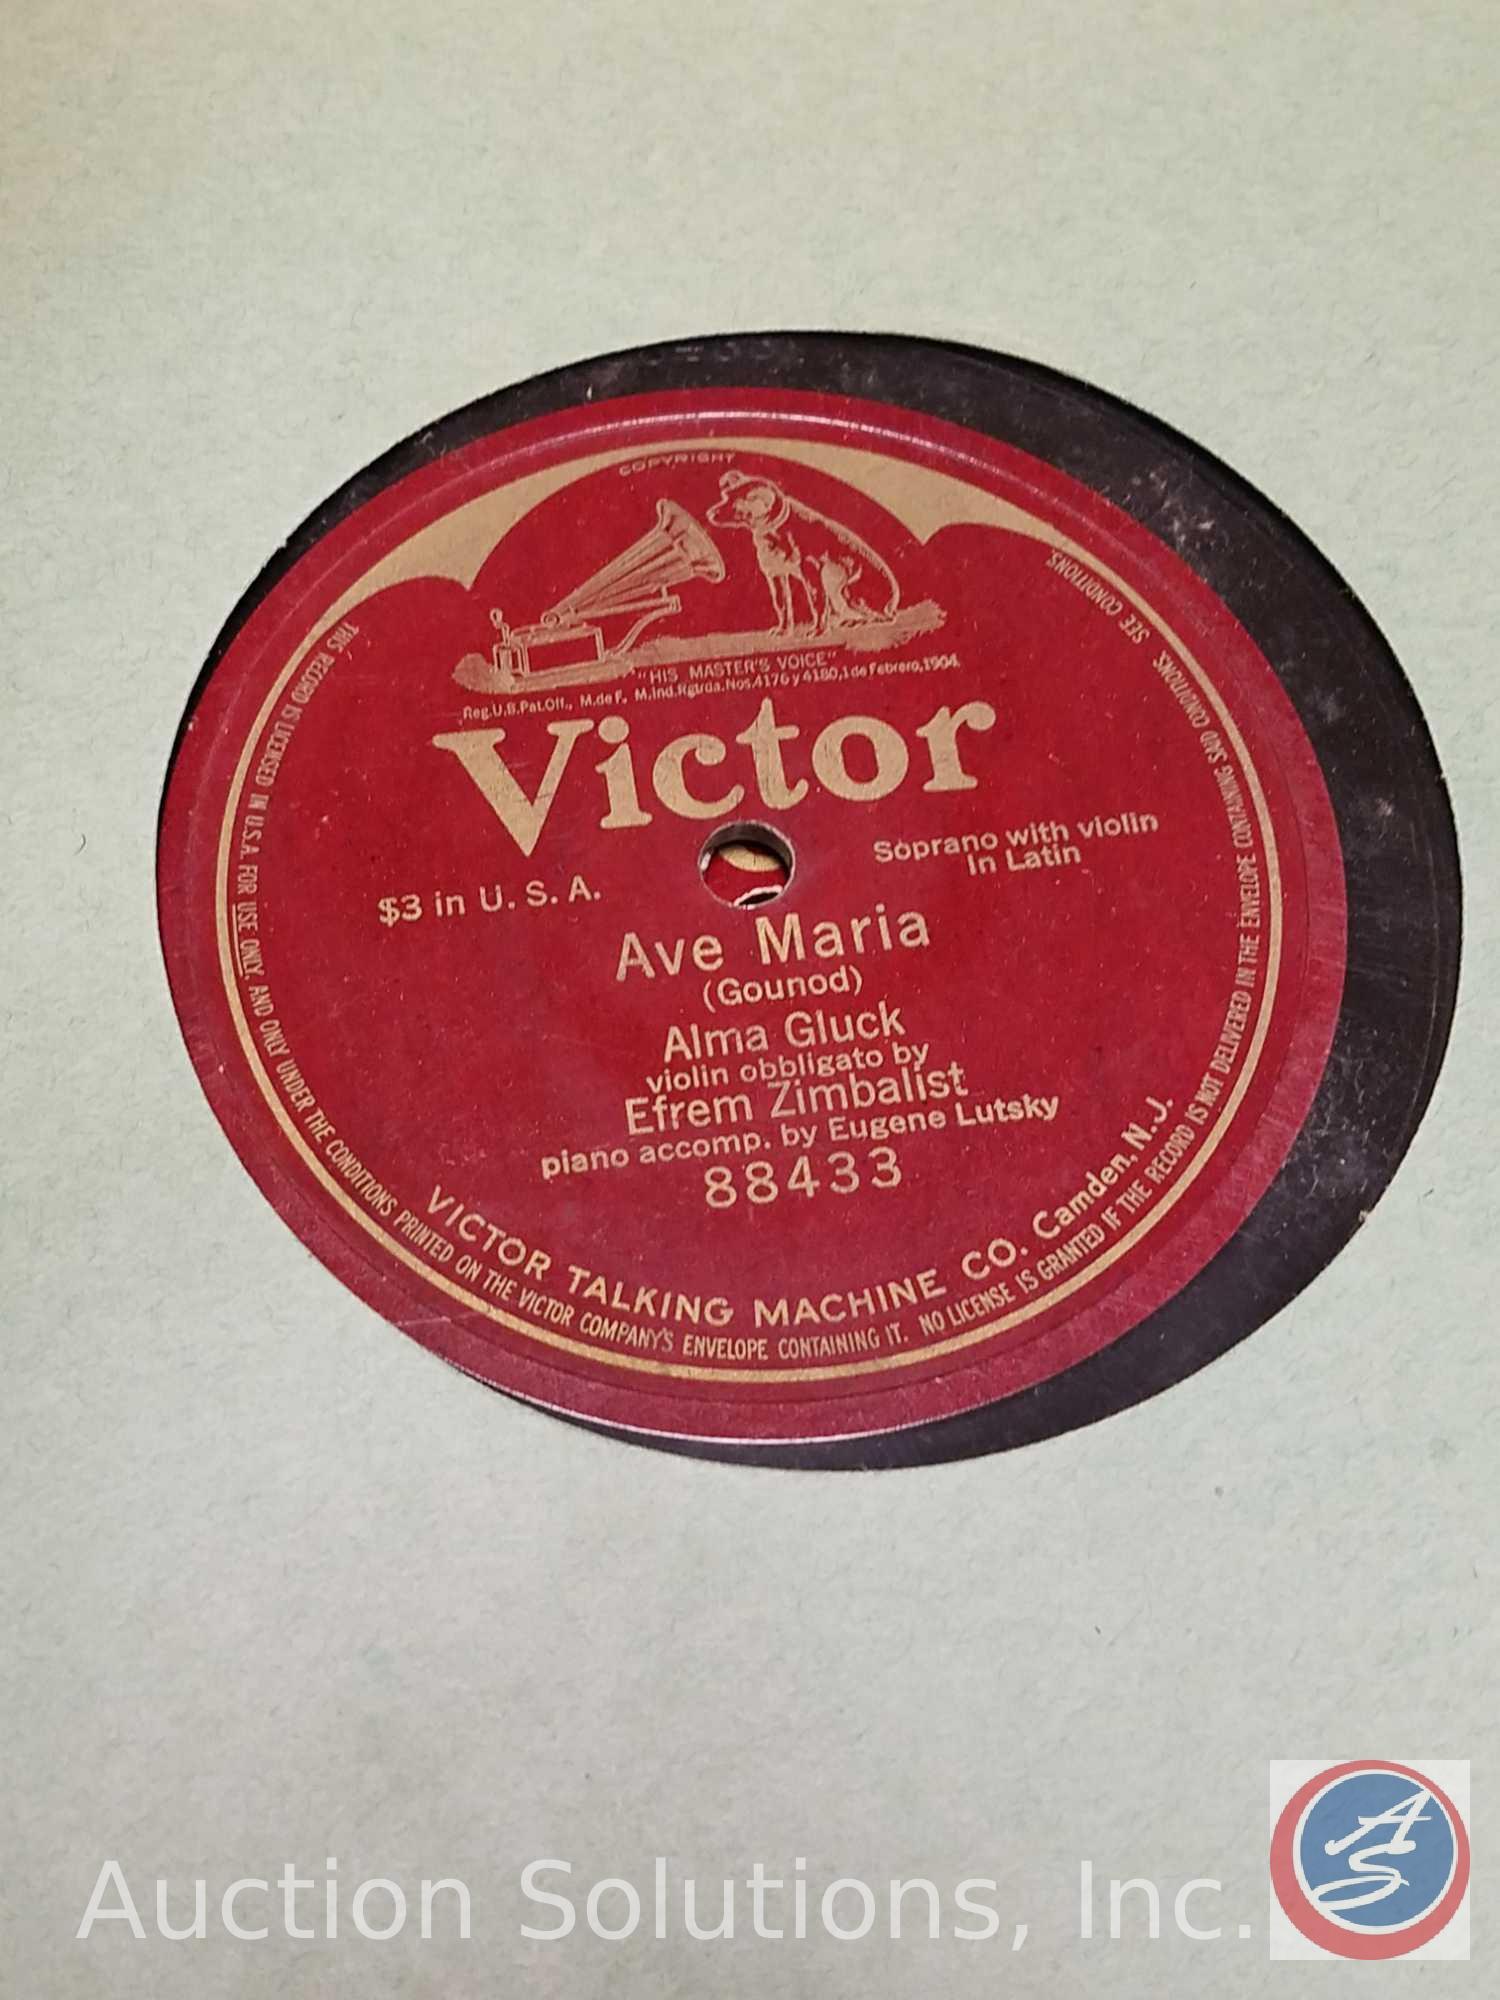 Vintage Records including: Tagliavini, Carousel, Mmadama Butterfly, Home Recording Records and More